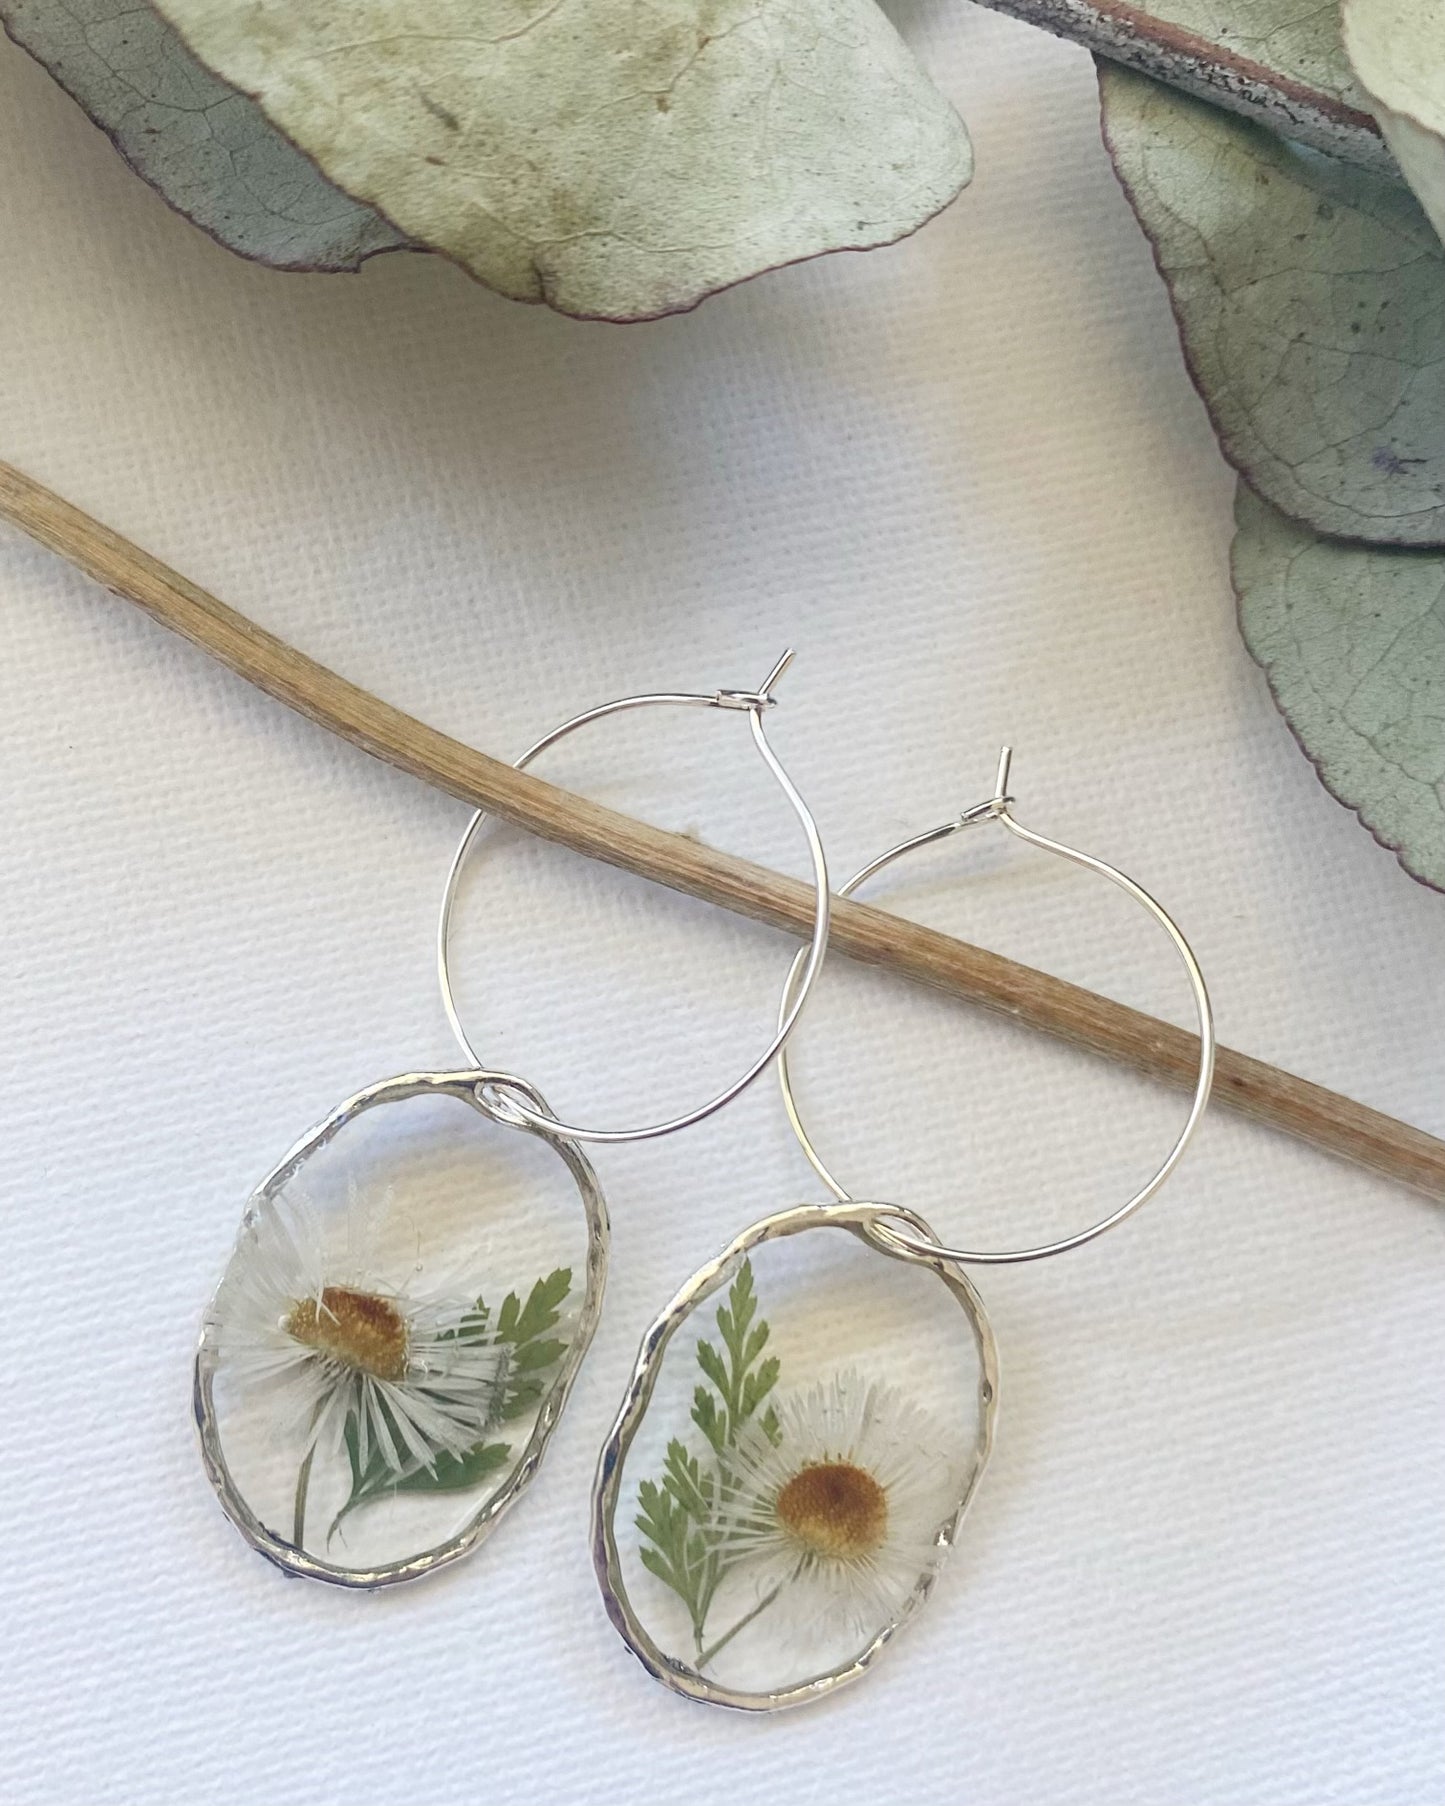 Pressed White Daisy and Fern Earrings